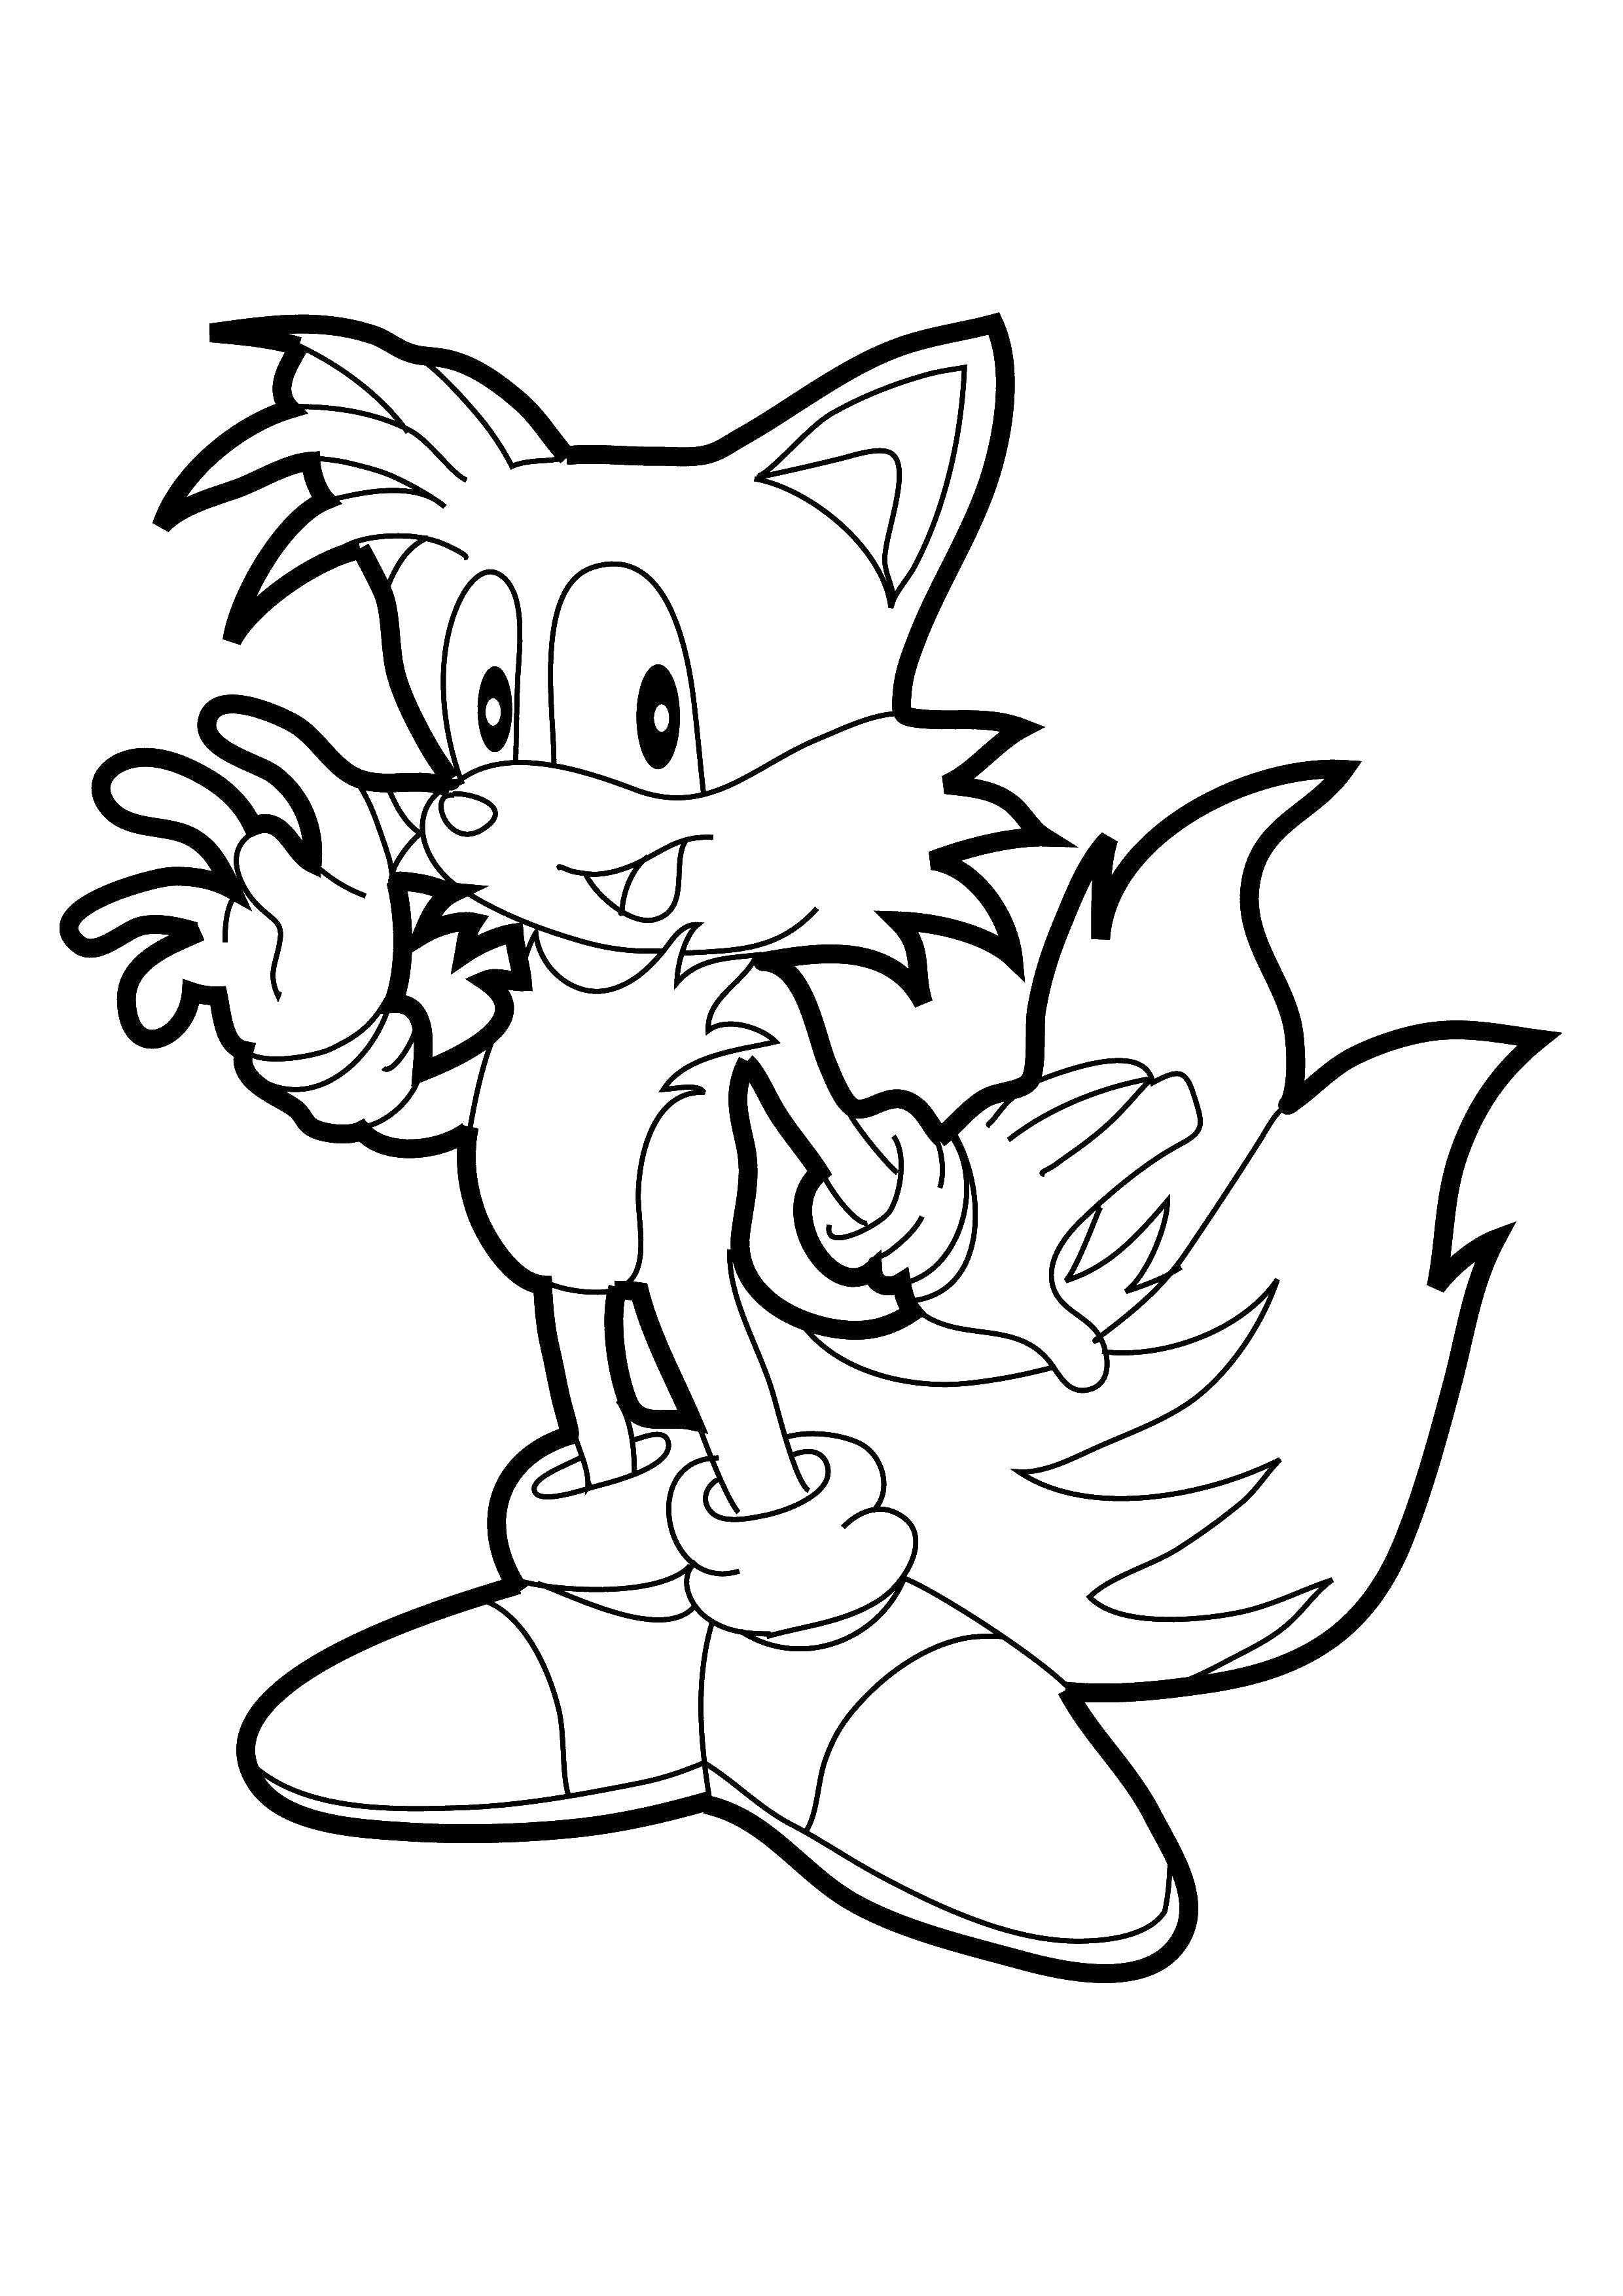 Online coloring pages coloring page miles tails prower coloring pages sonic download print coloring page